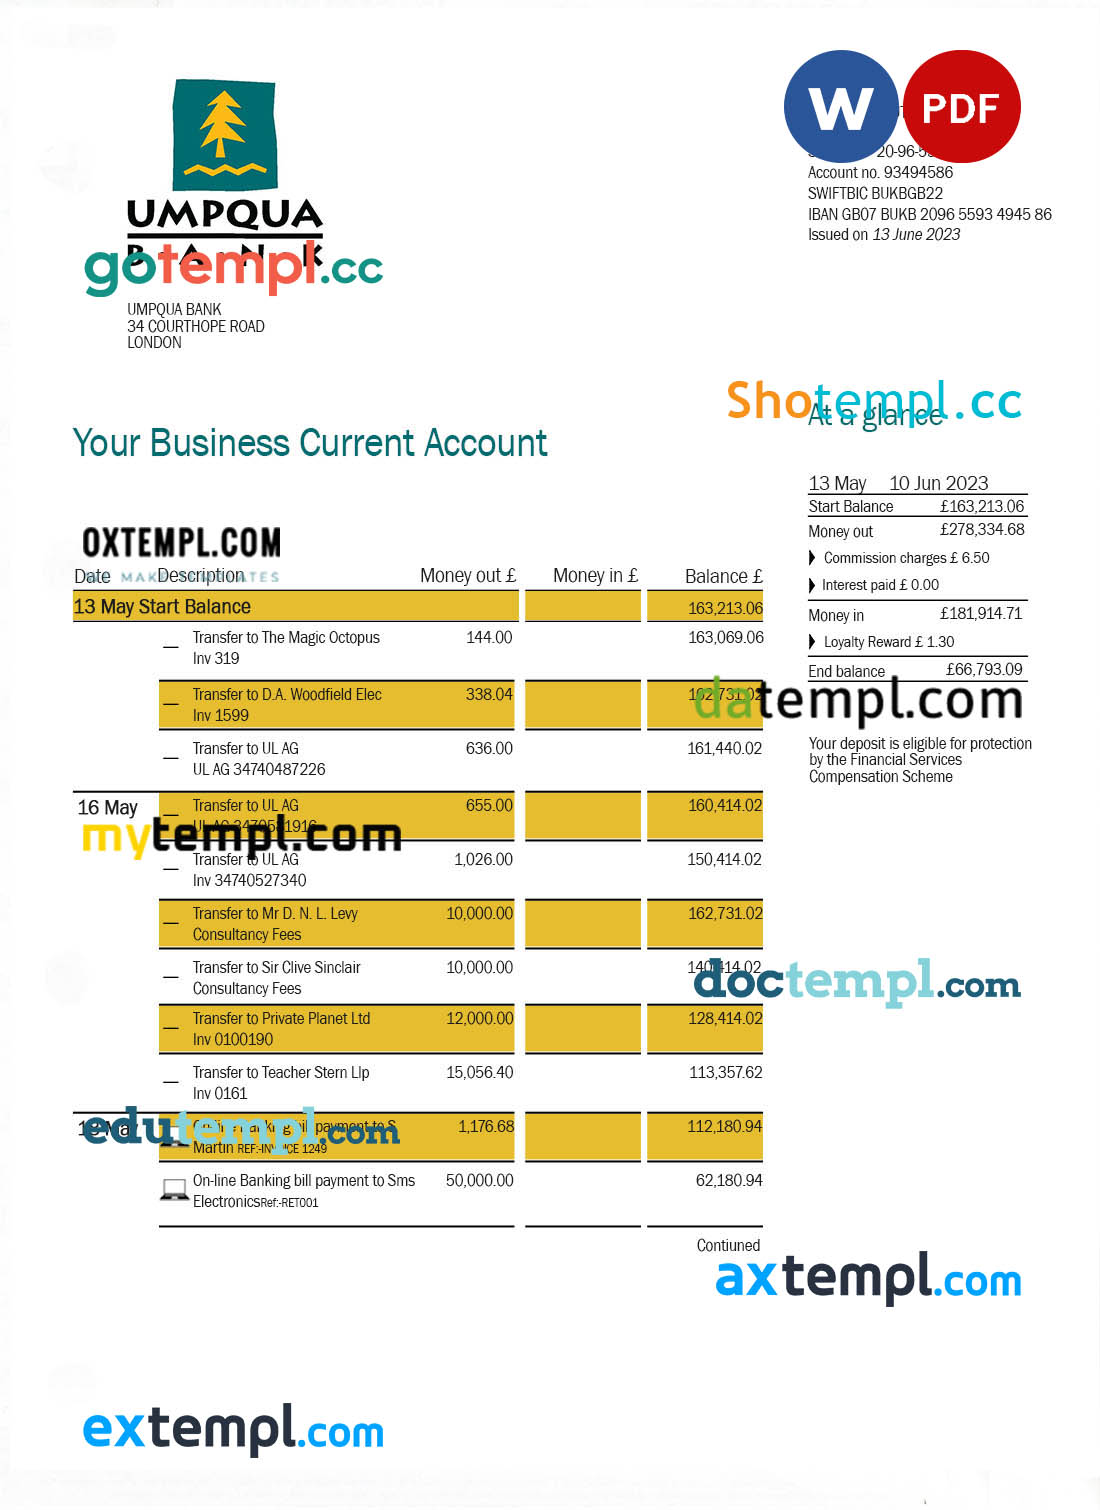 Syria Cham Bank bank account closure reference letter template in Word and PDF format